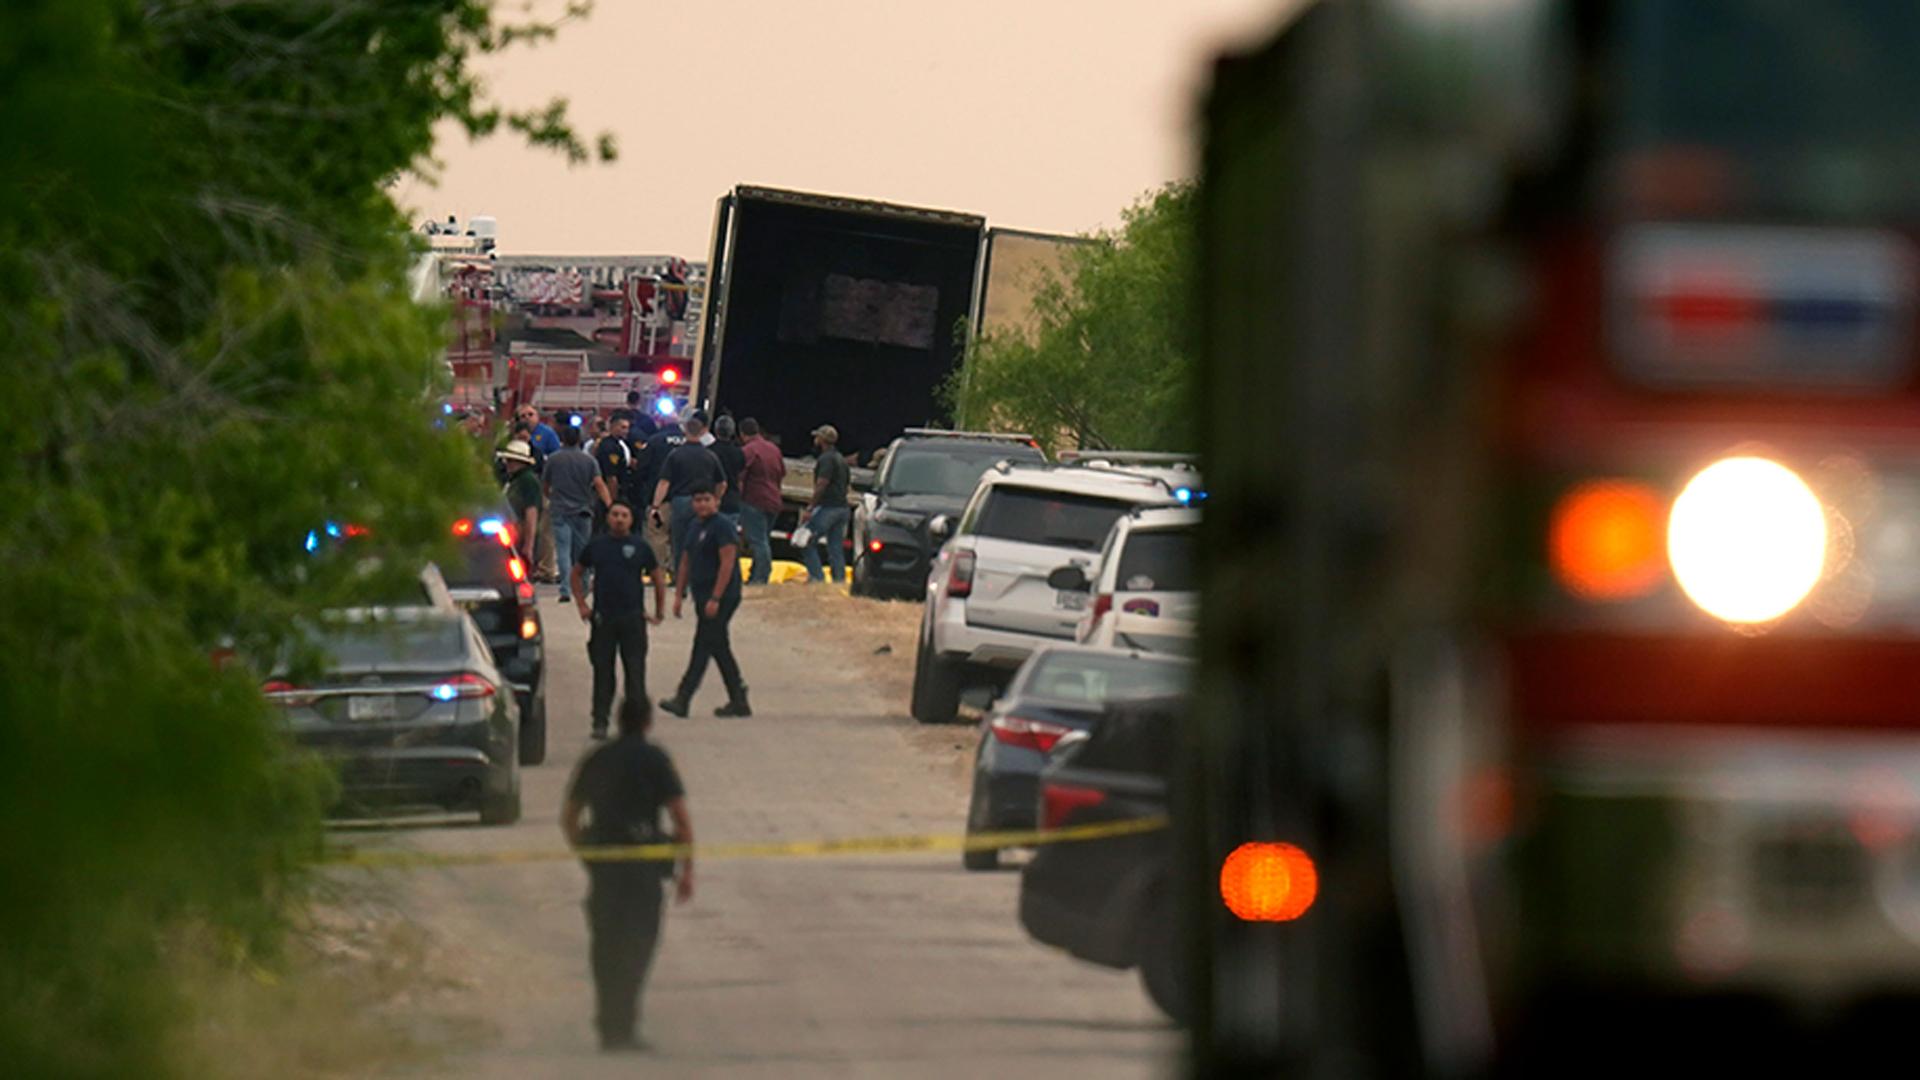 Body bags lie at the scene where a tractor trailer with multiple dead bodies was discovered, in San Antonio, Texas